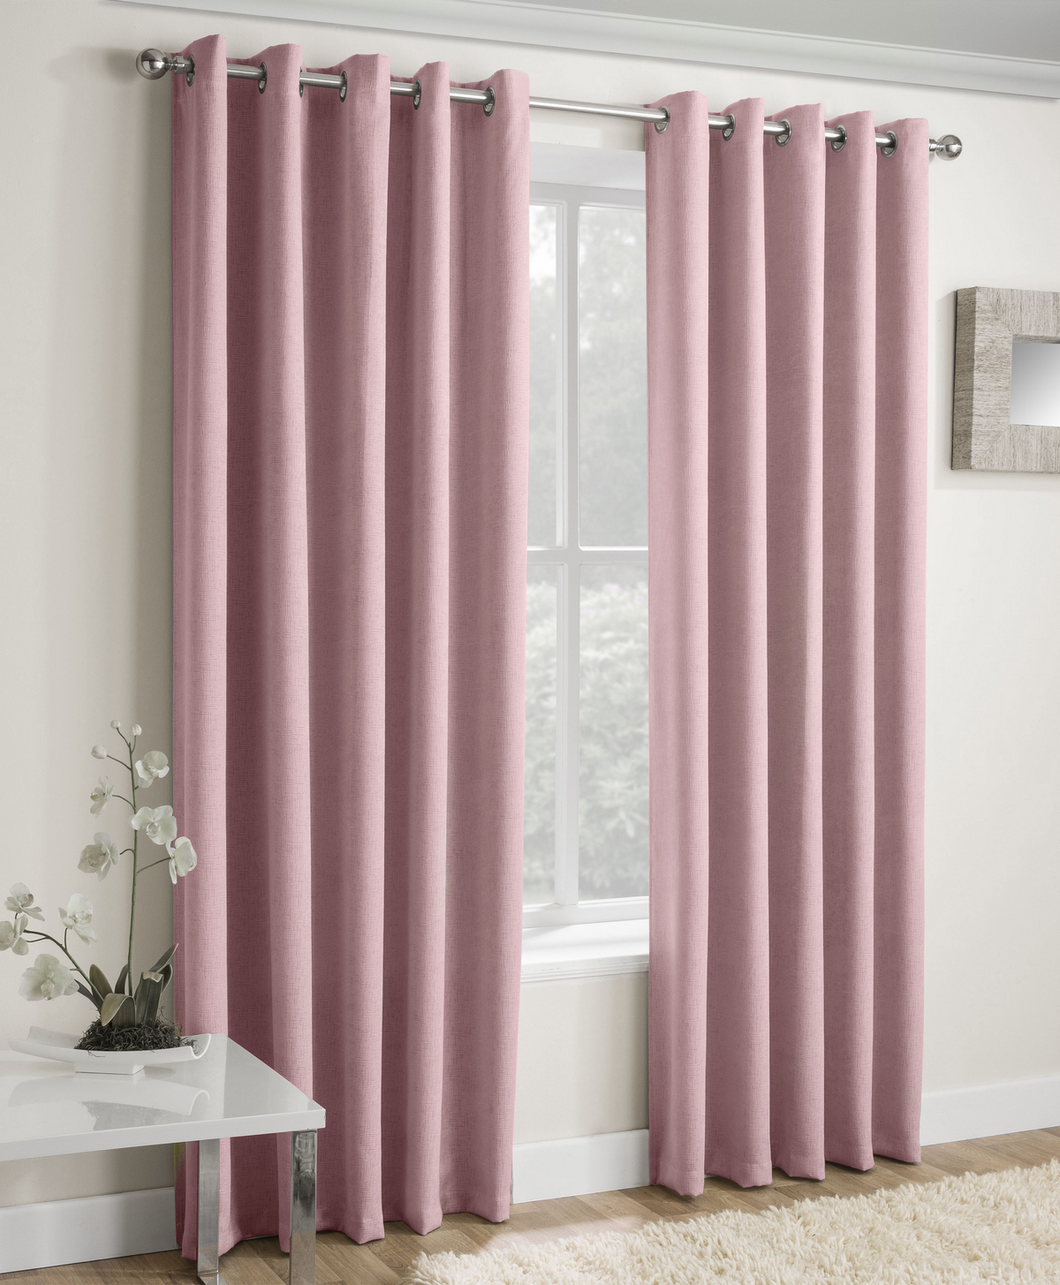 Vogue Blush Pink Textured Self Lined Curtains